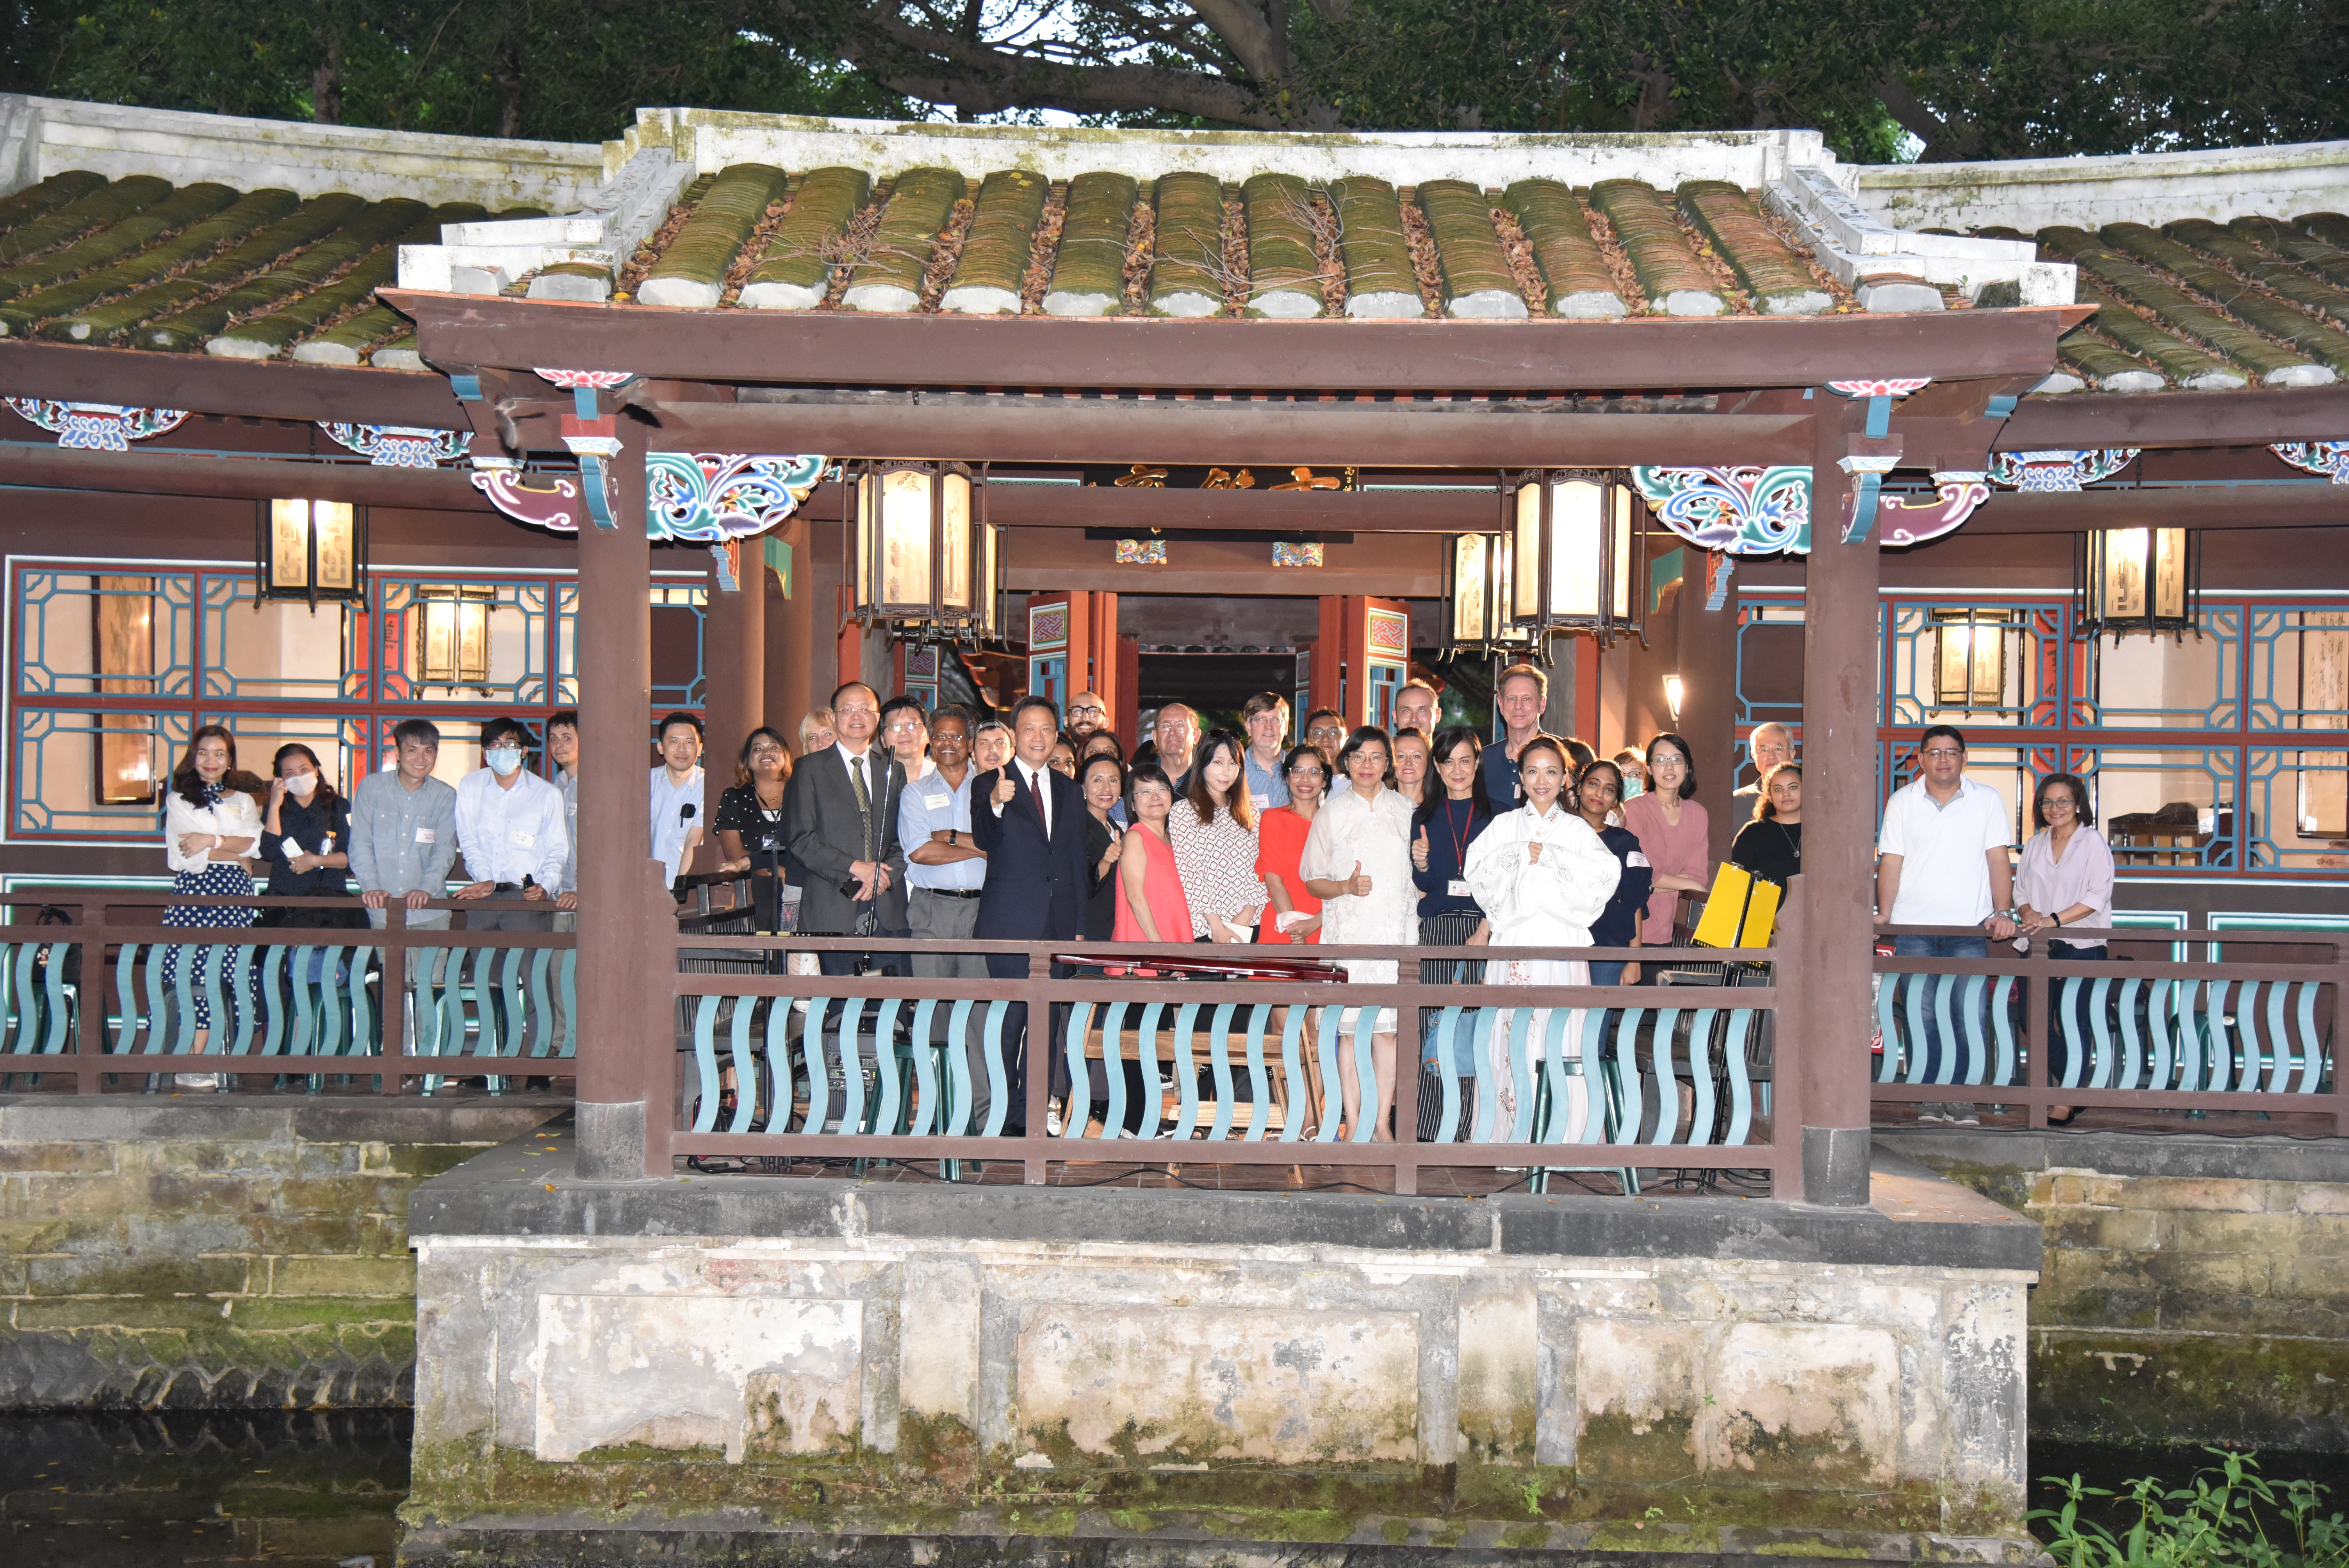 Link: 2020 Moon Festival Tea Party for Visiting Scholars